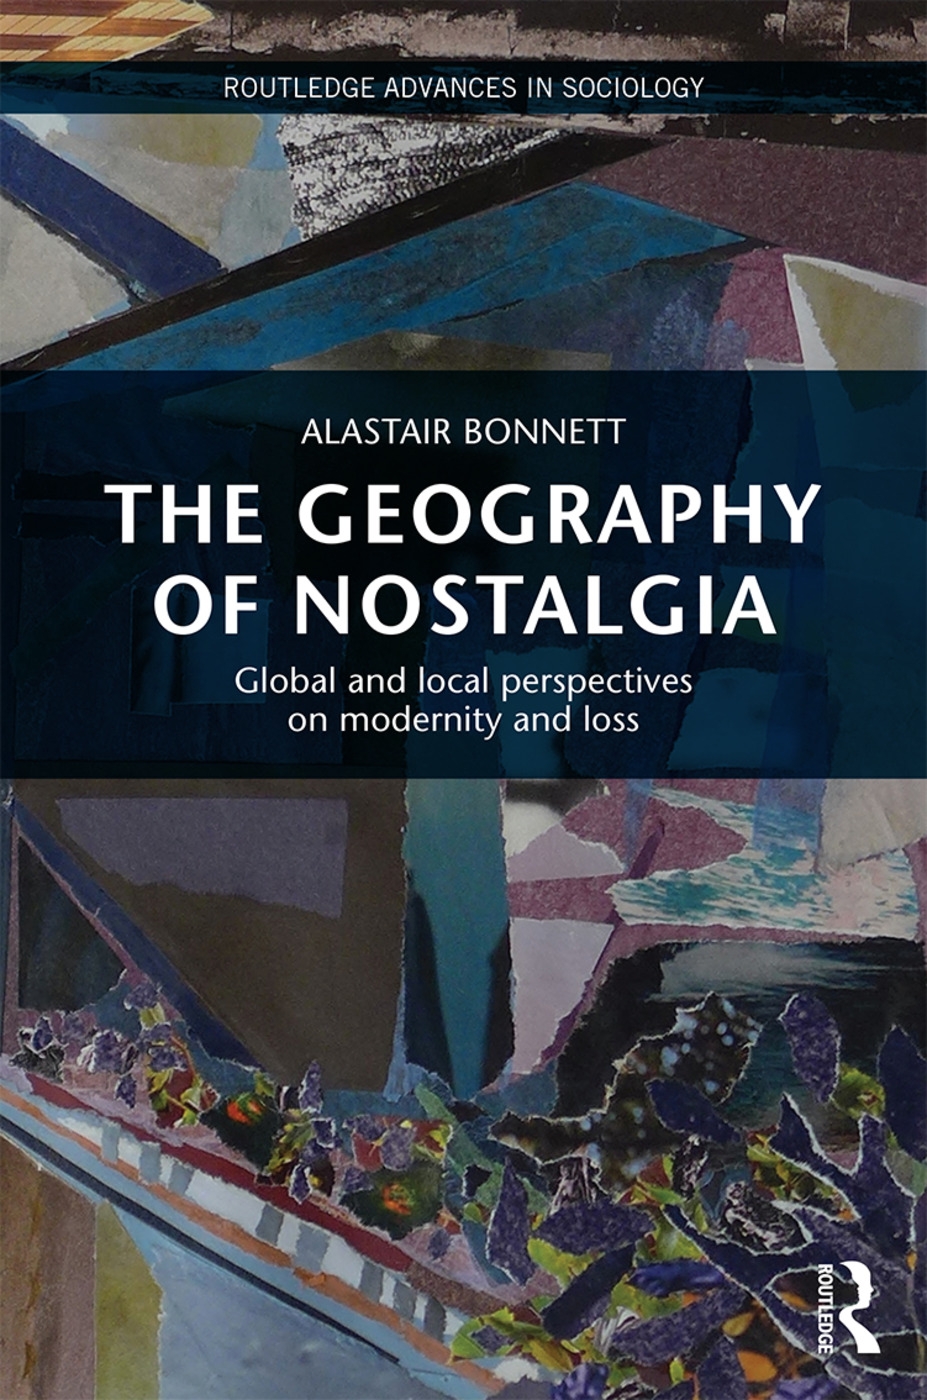 The Geography of Nostalgia: Global and local perspectives on modernity and loss